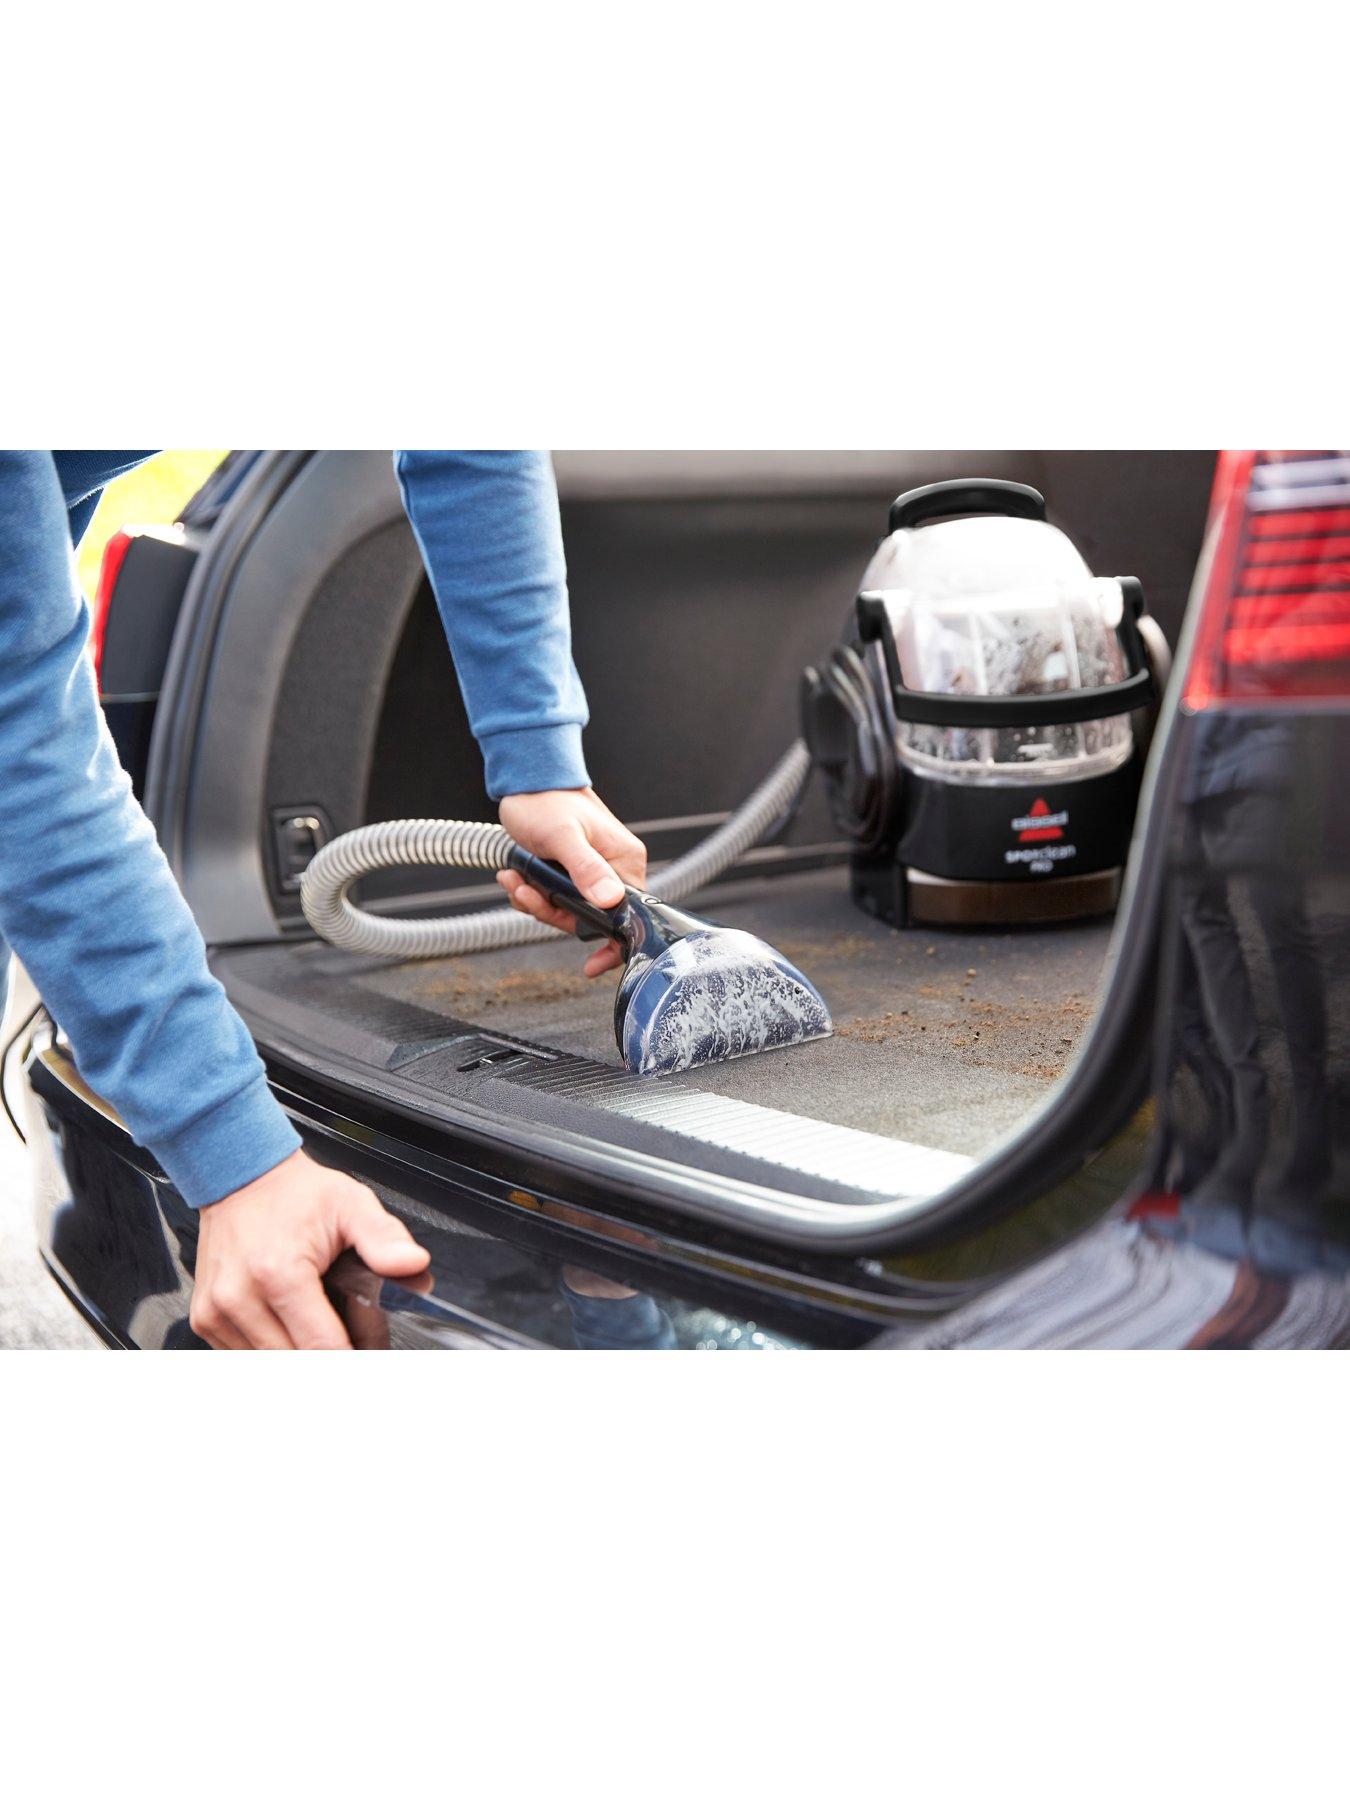 BISSELL Spot Clean Pro 1558E - Cleaning up mess in car 